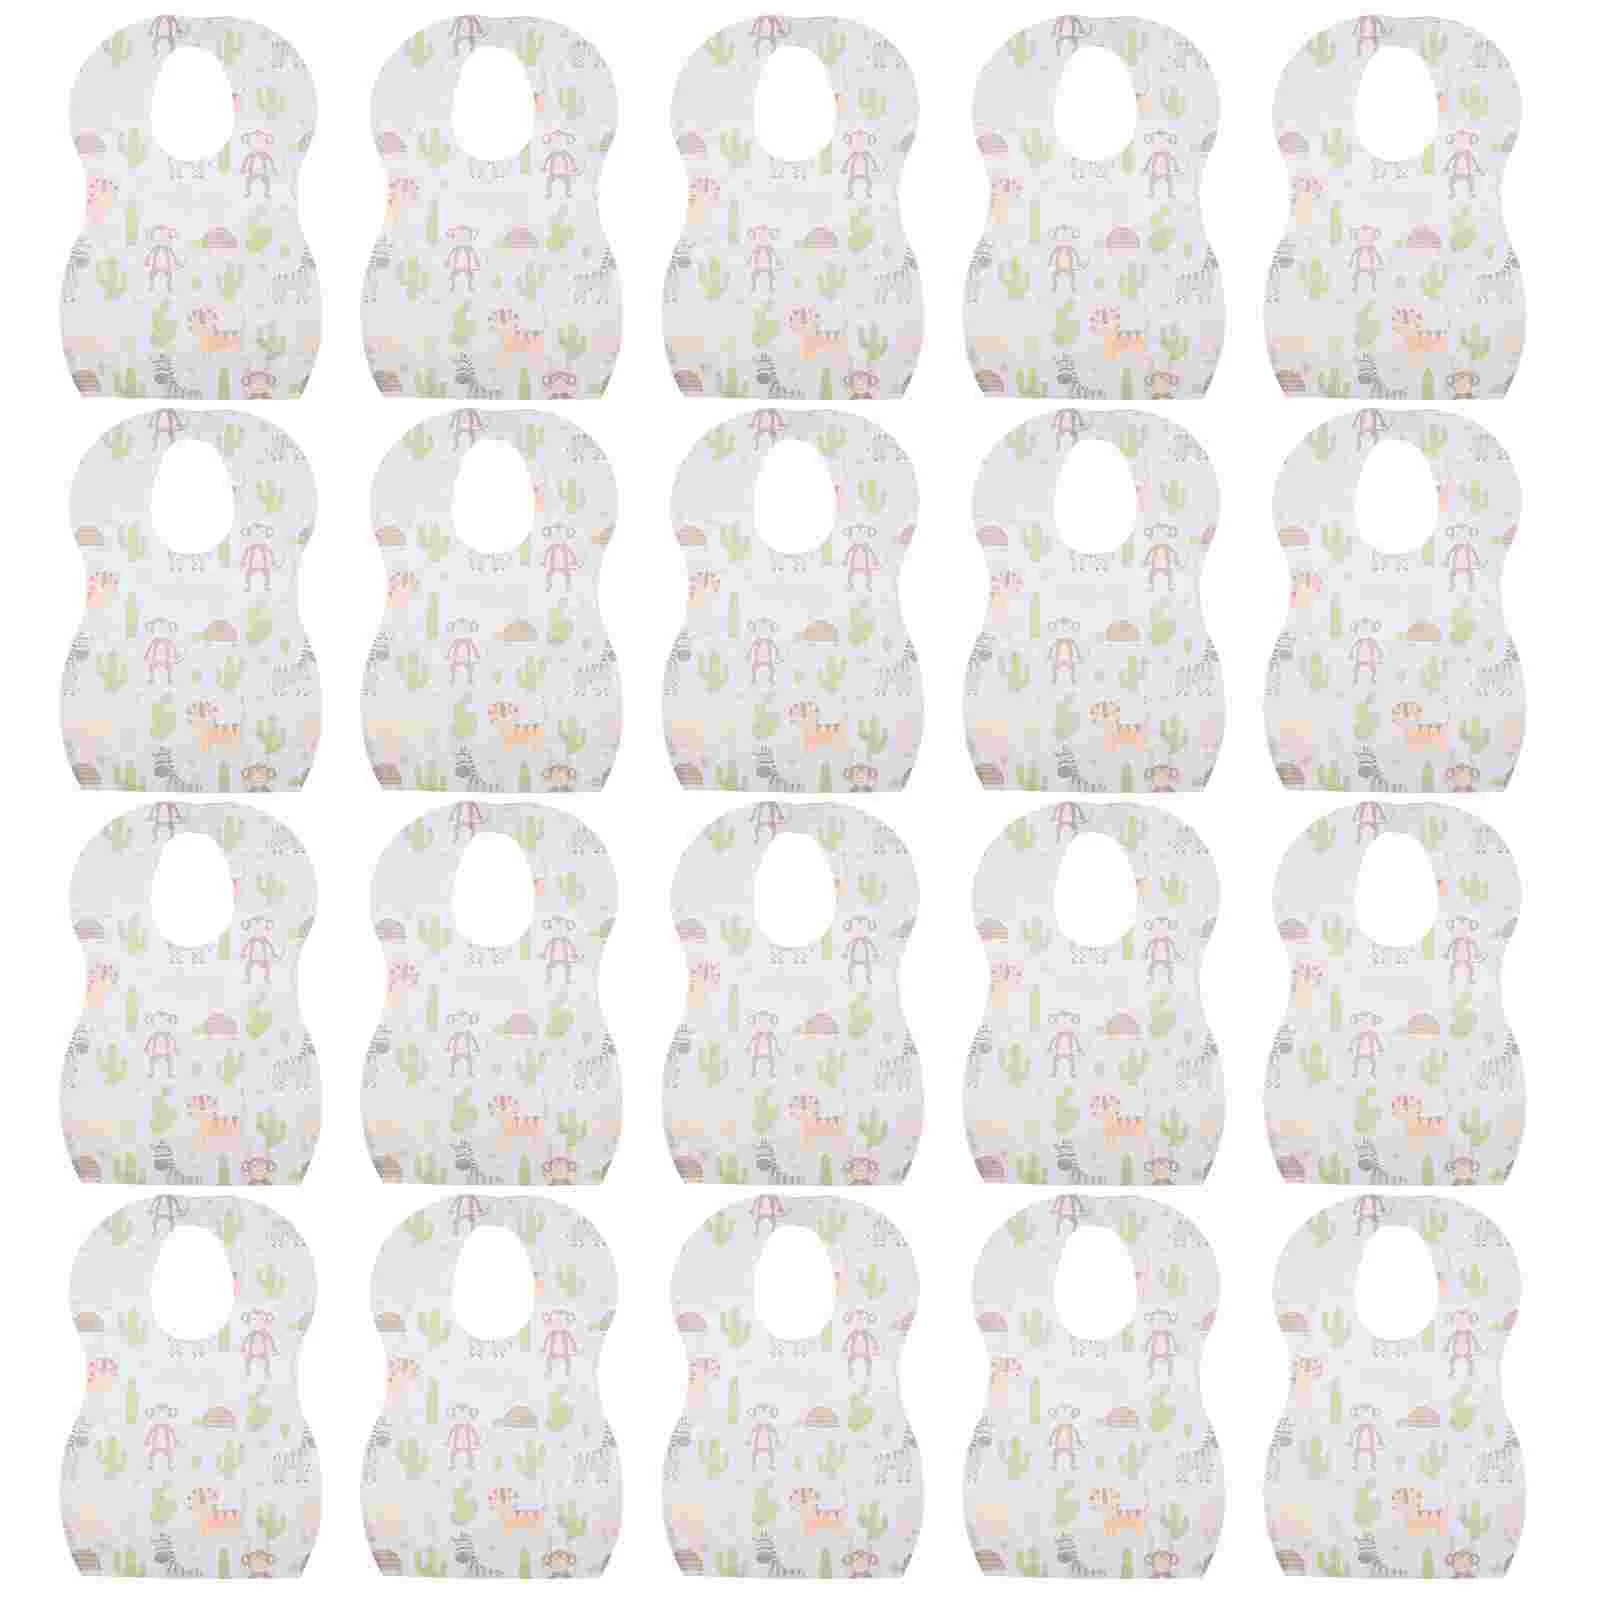 

20 Pcs Baby Bib Cartoon Toddler Bibs Feed Disposable Eating Kids Non-woven Fabric Infant Items Highchairs